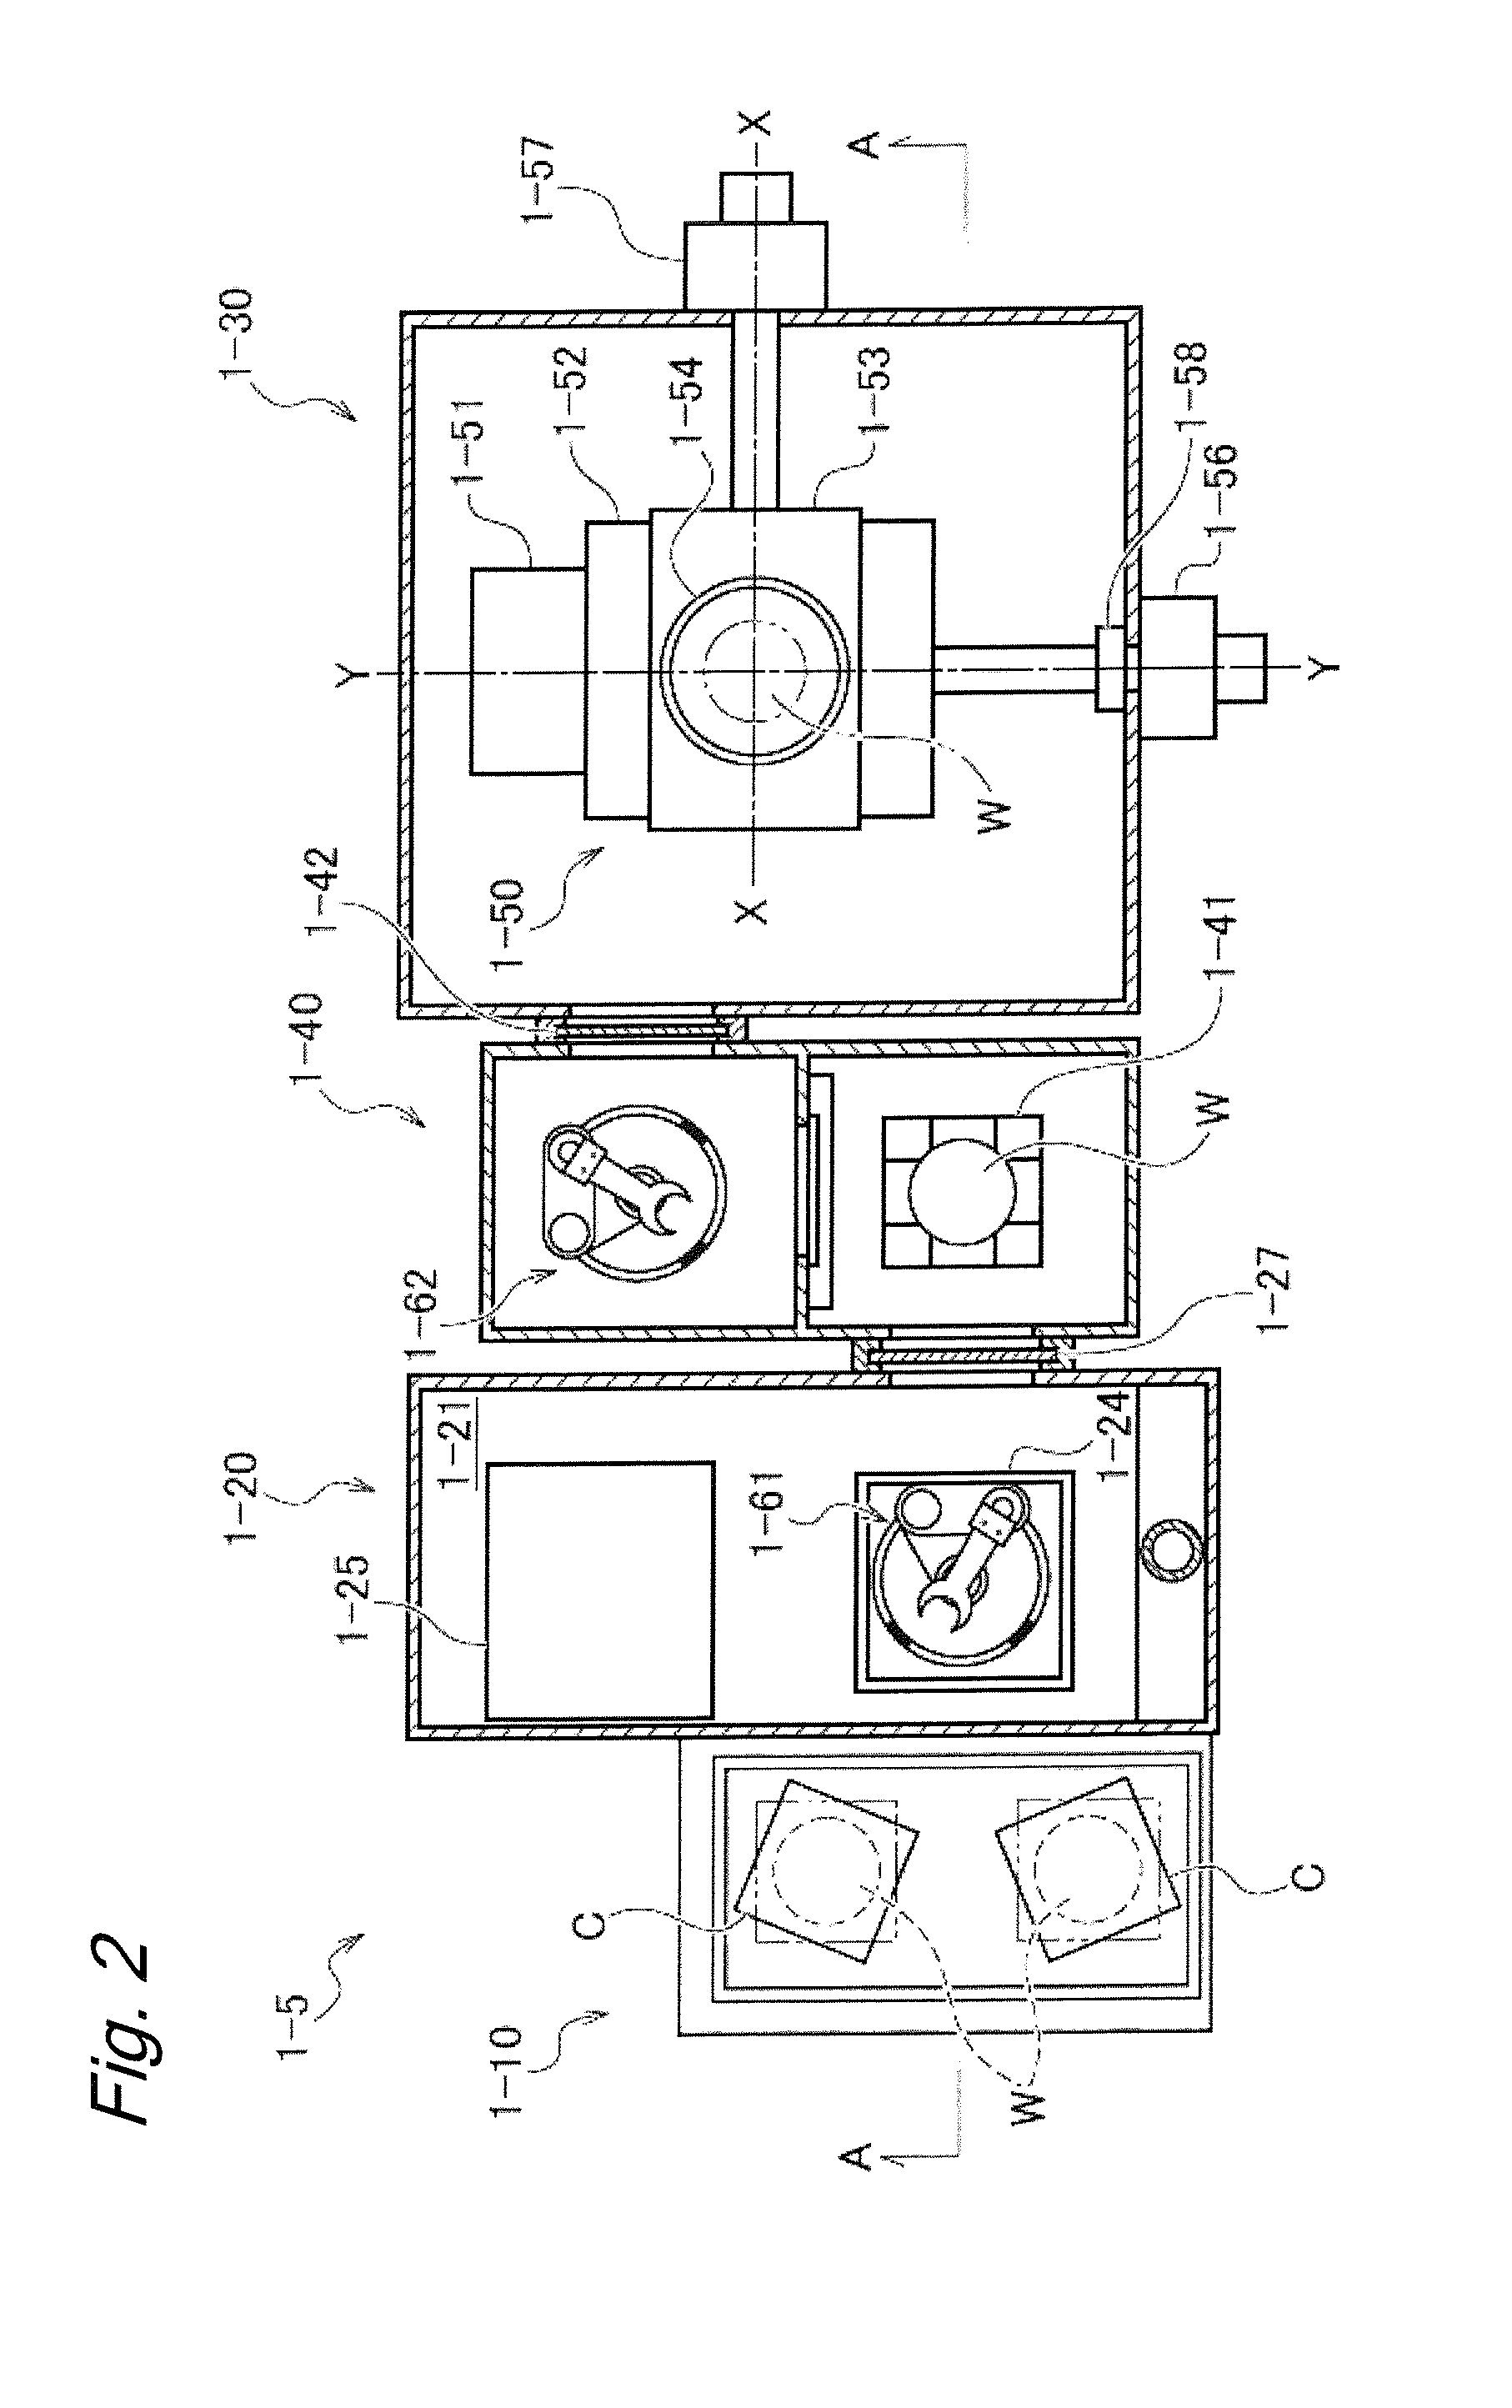 Inspection system and inspection image data generation method